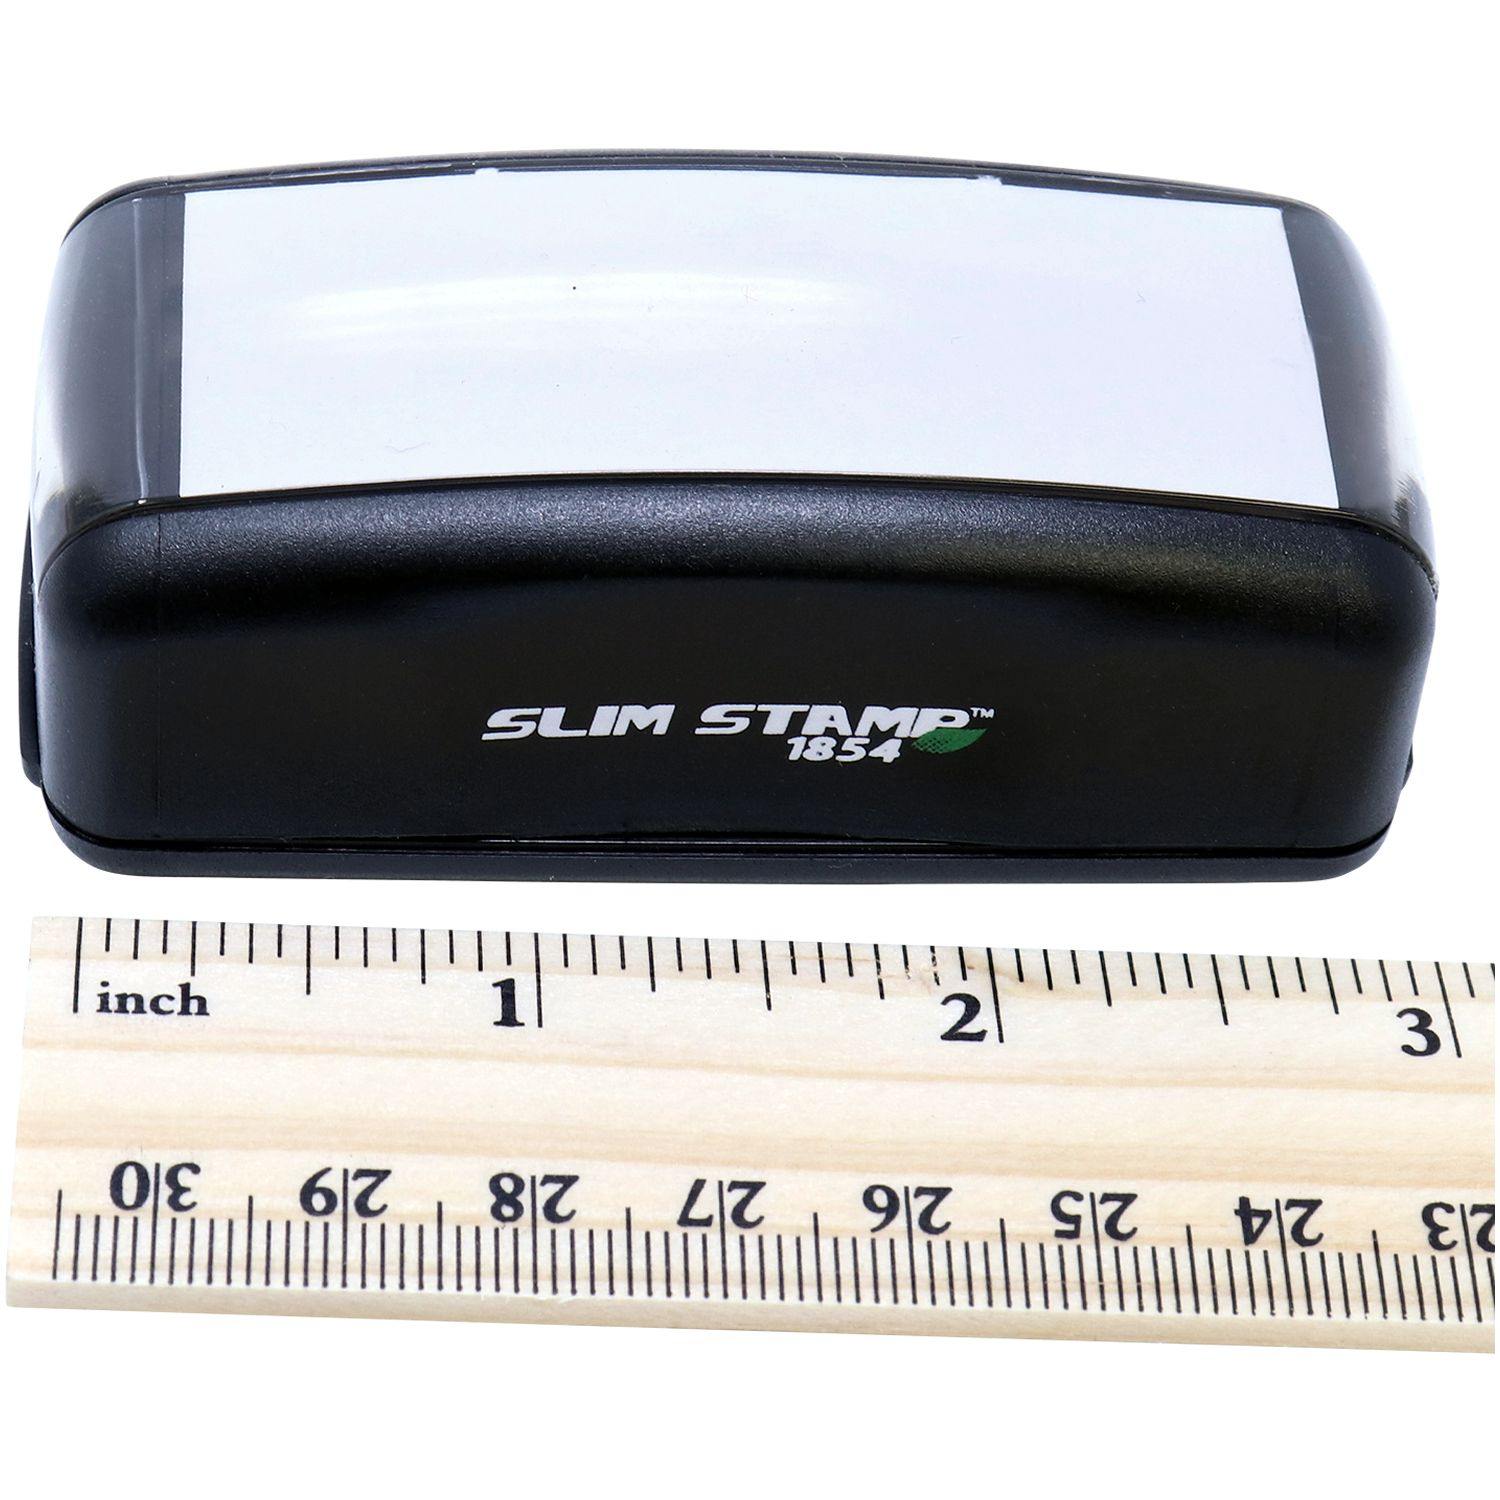 Measurement Large Pre-Inked Medical Personnel Only Stamp with Ruler